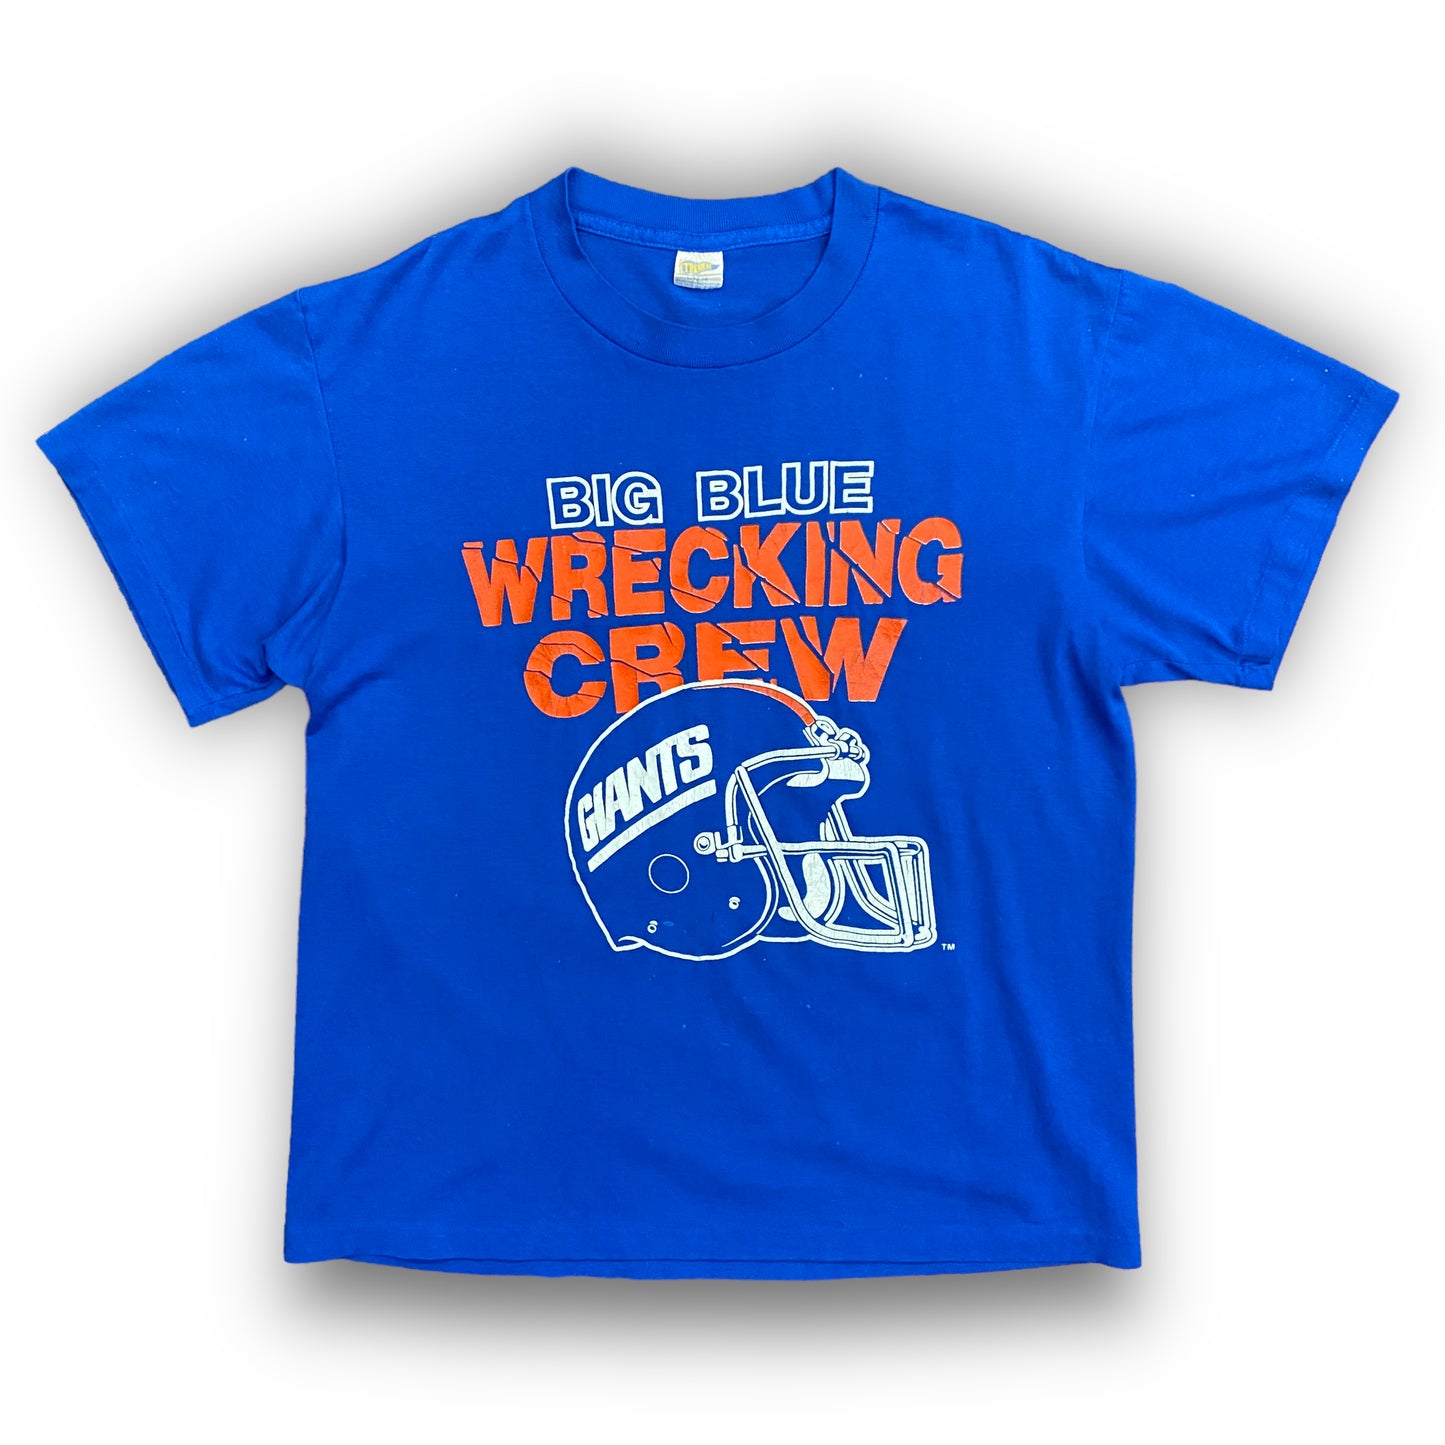 Vintage 1980s New York Giants "Big Blue Wrecking Crew" Tee - Size Large